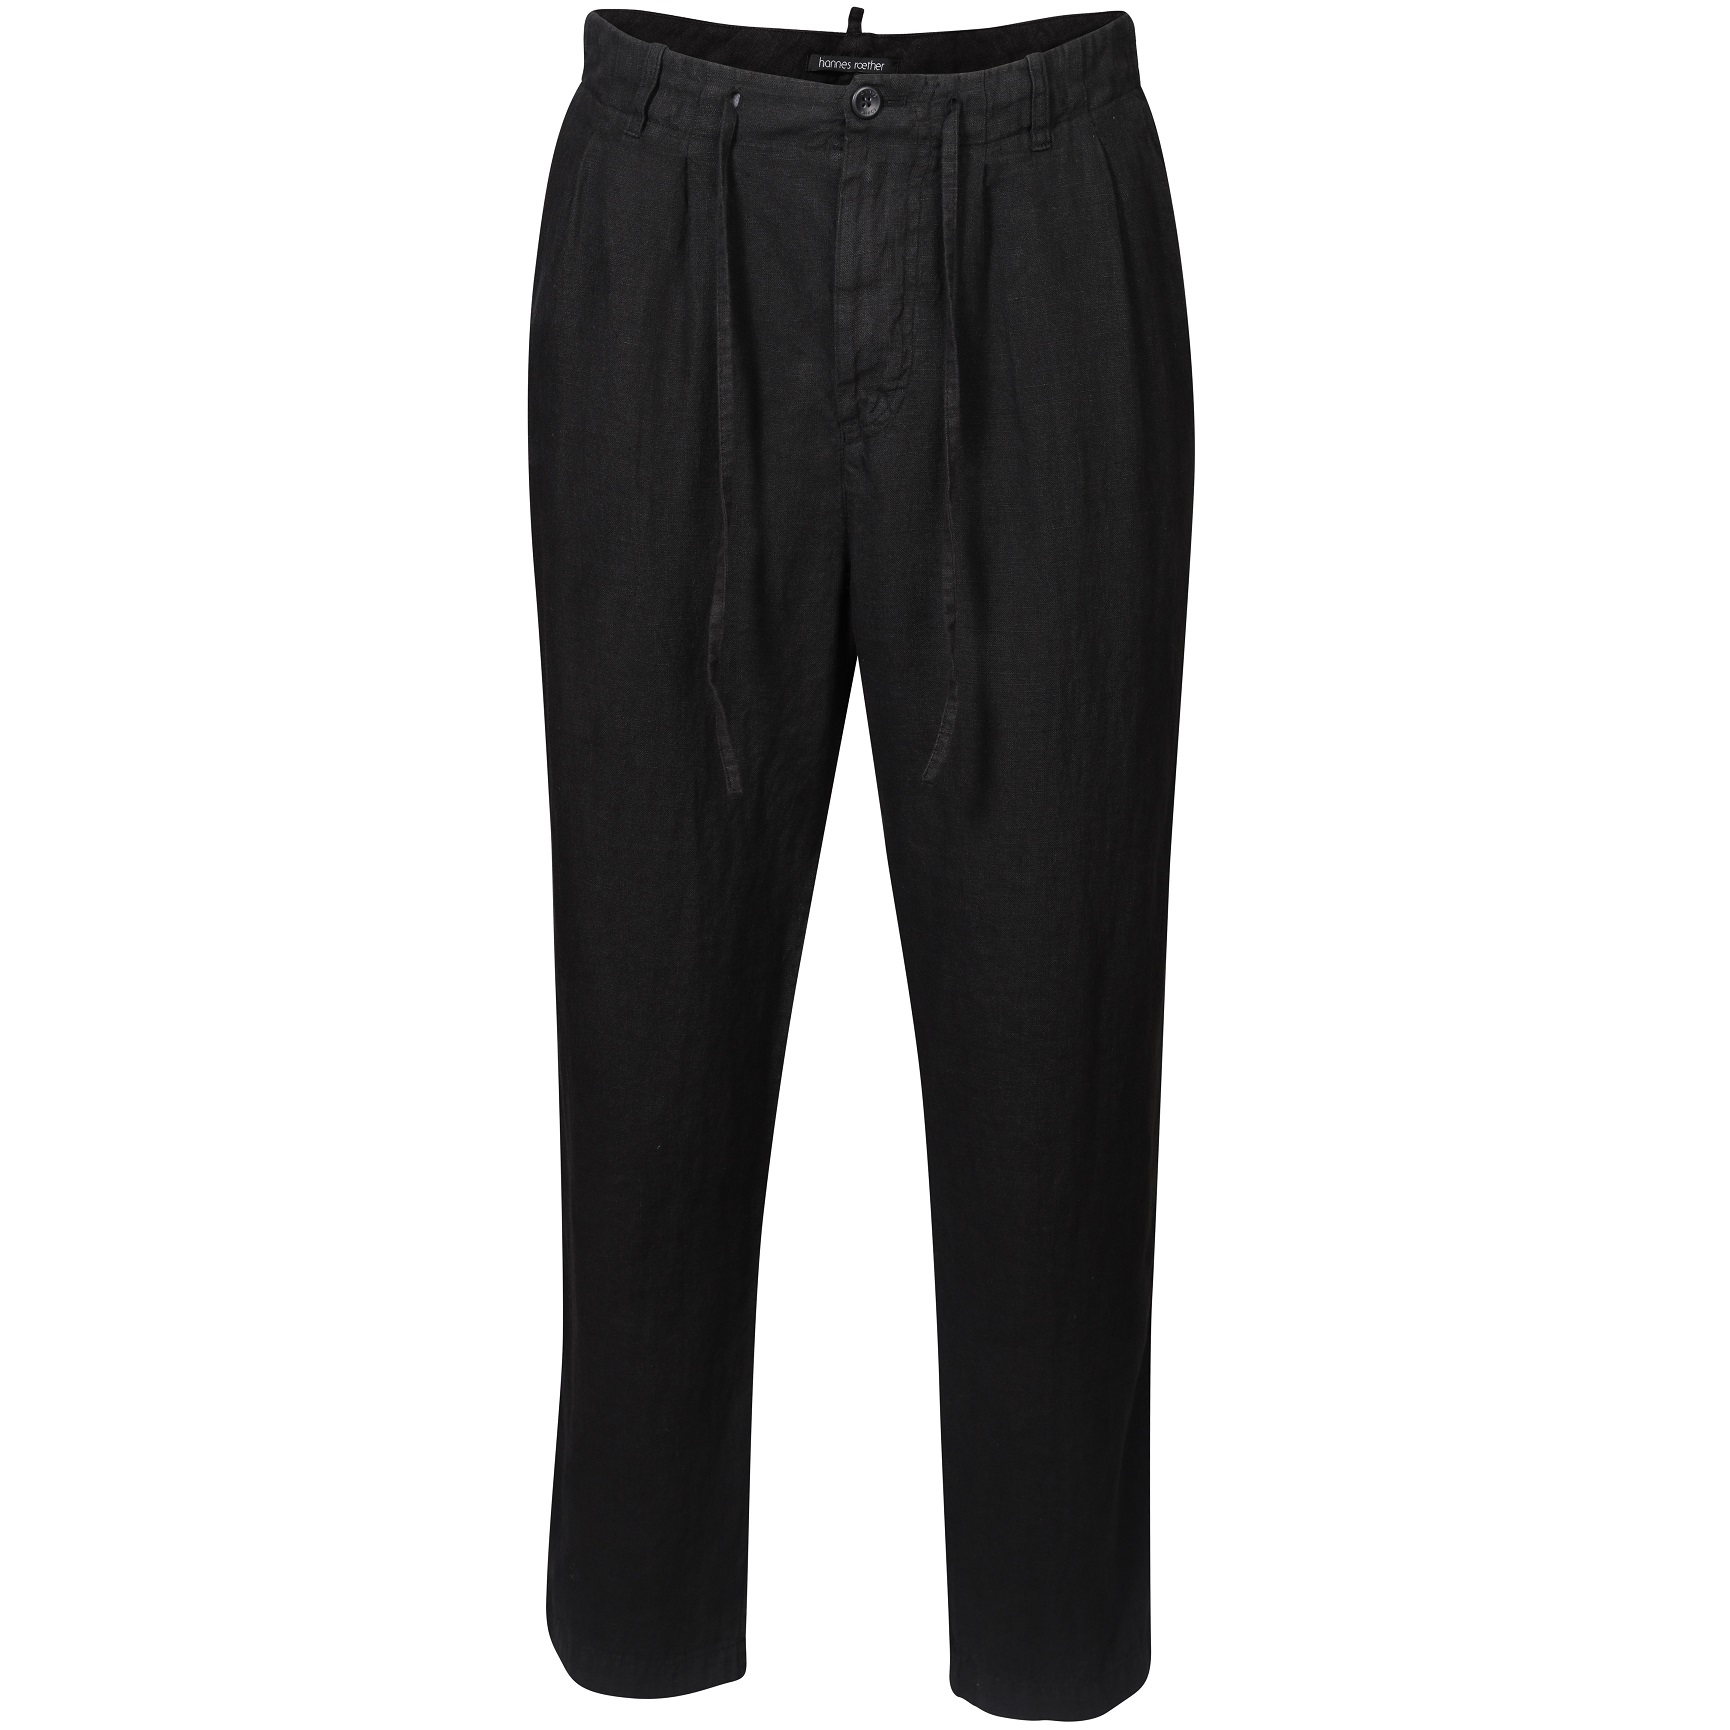 HANNES ROETHER Linen Trouser in Black M